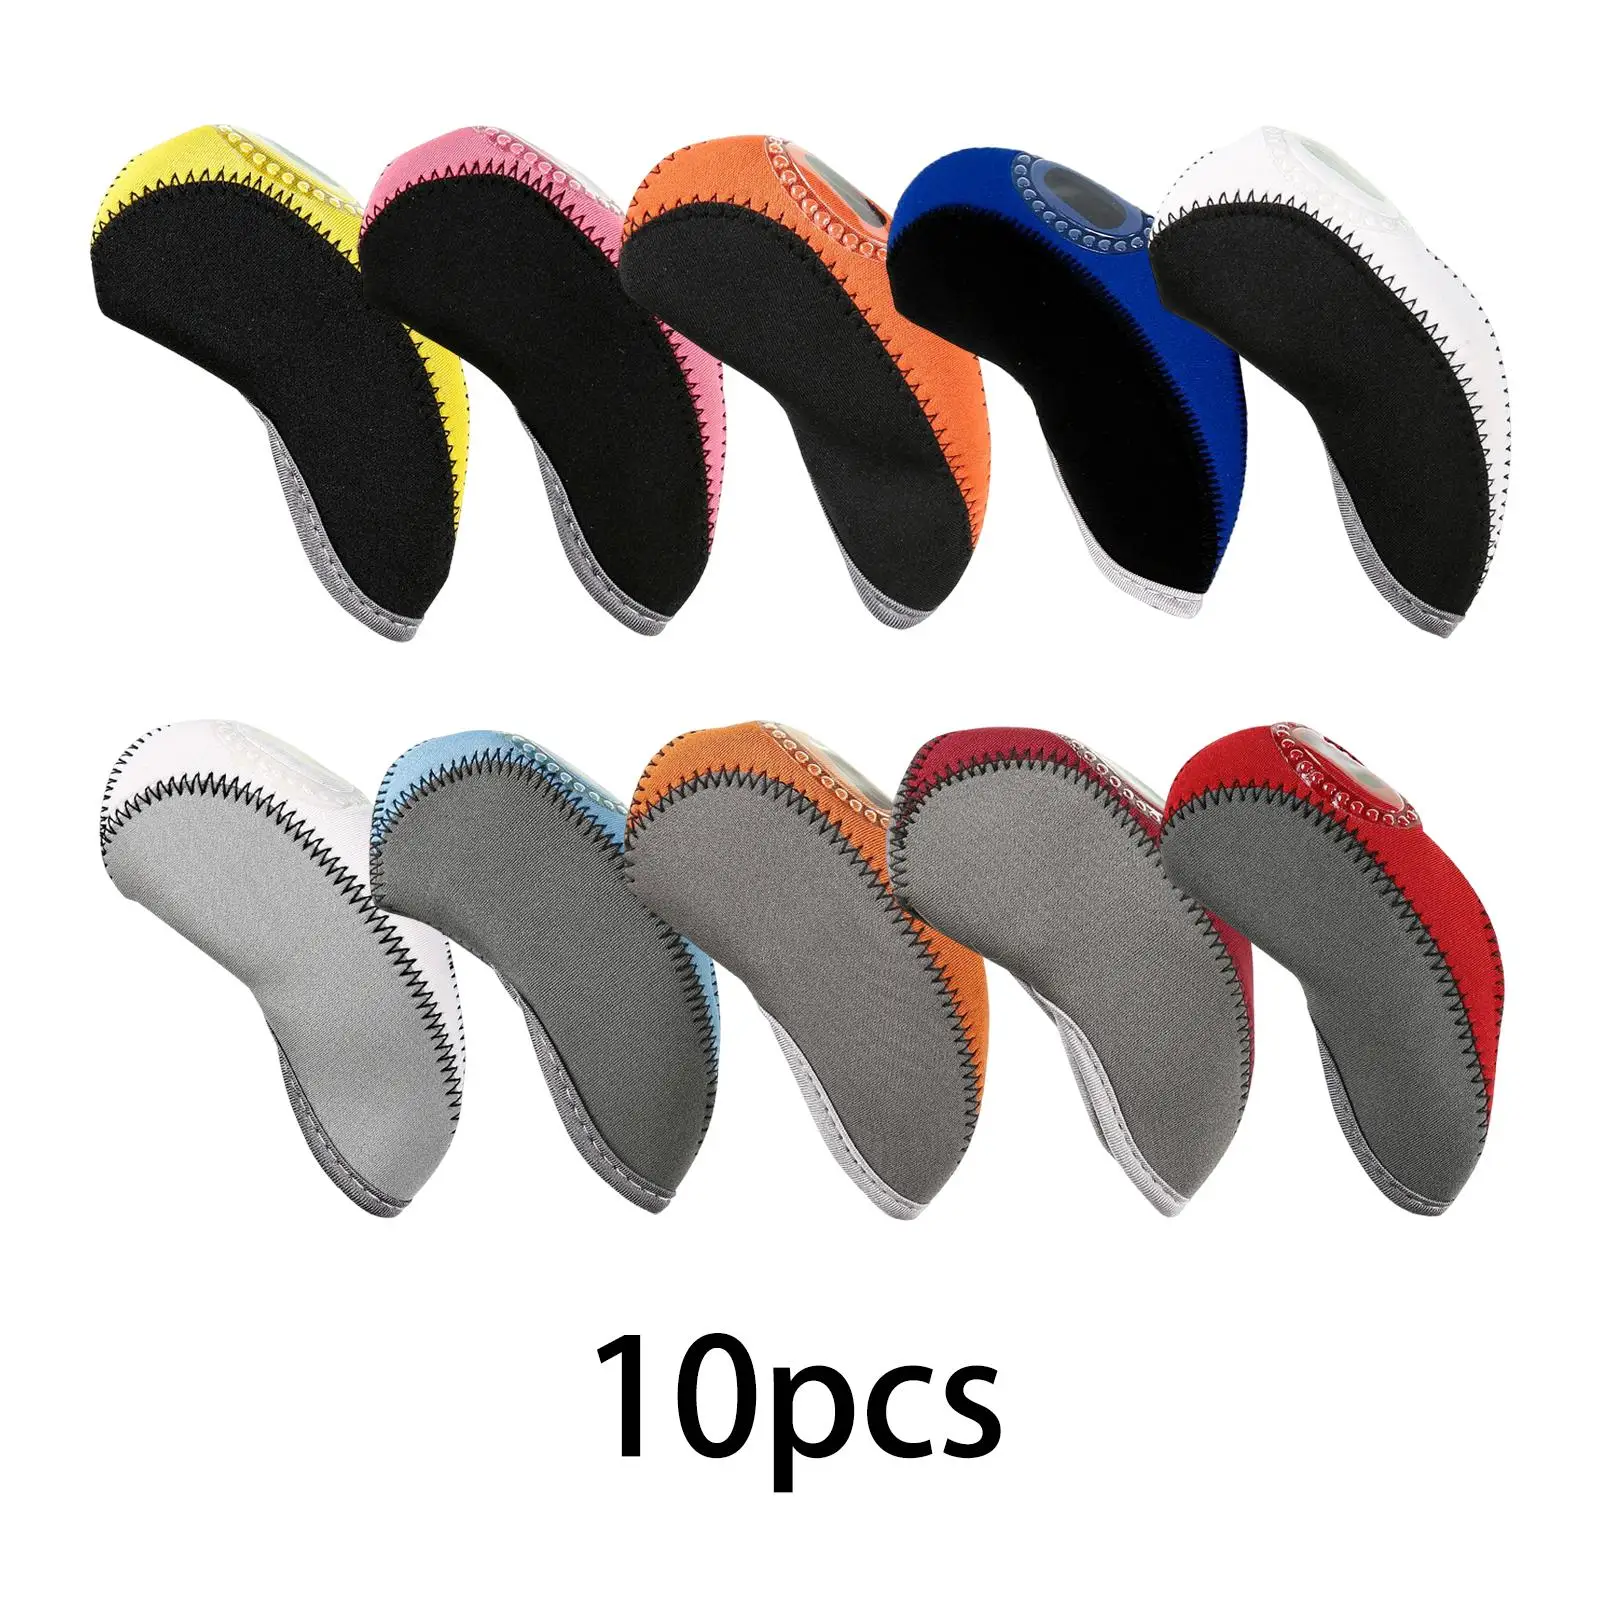 

10Pcs Neoprene Golf Irons Head Cover Set Protect Case Protective Covers Wedges Fairway Woods Headcovers for Training Golfer Gift